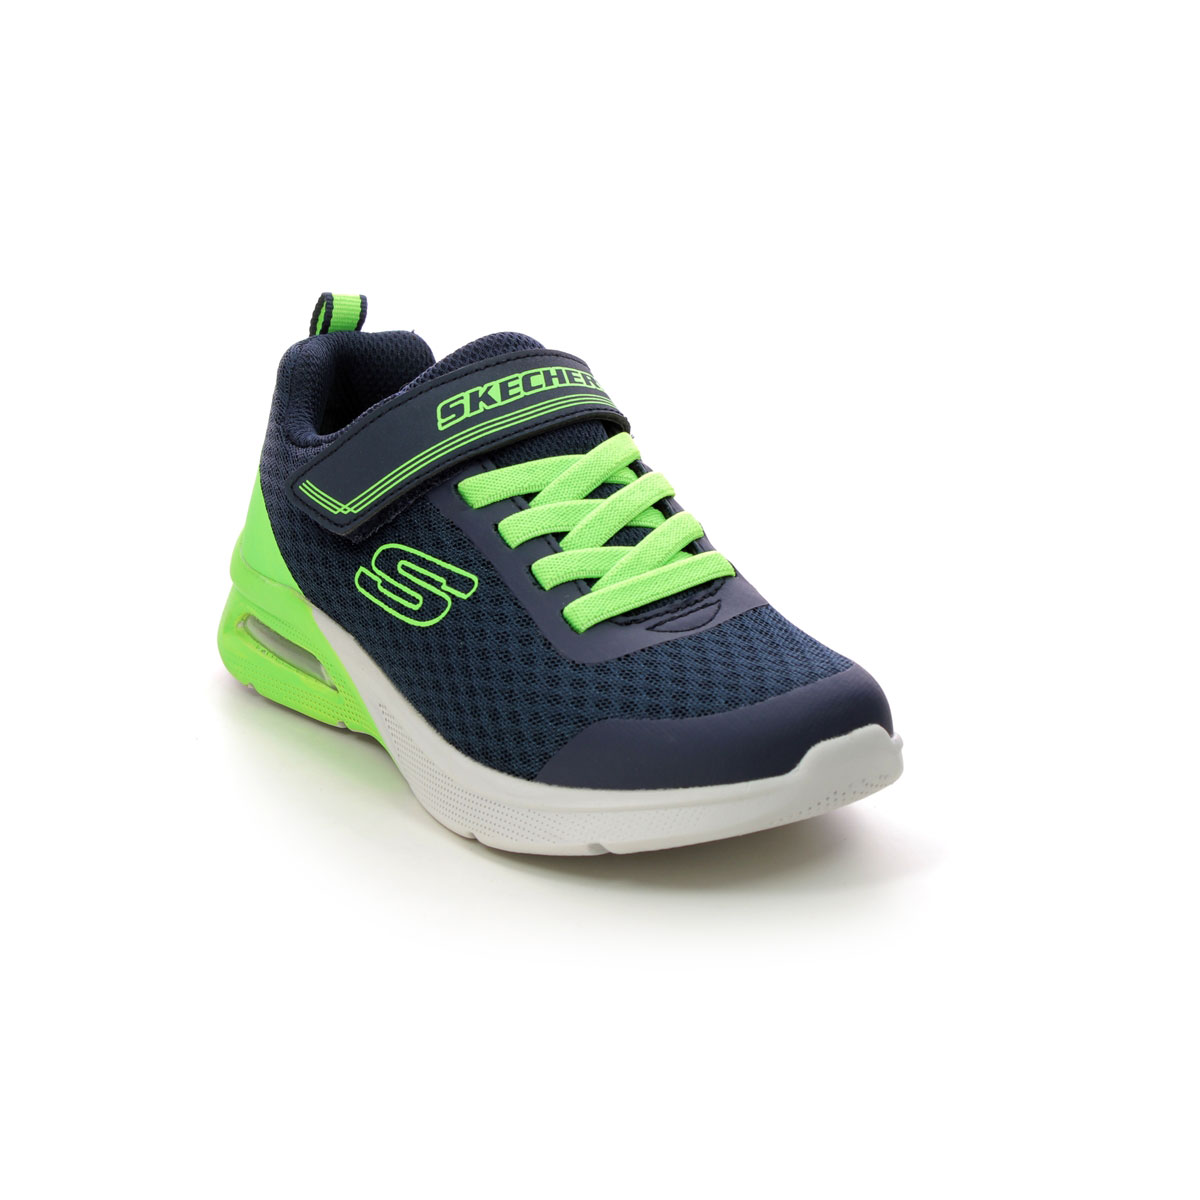 Skechers Microspec Max Navy Lime Kids Trainers 403773L In Size 31 In Plain Navy Lime For kids